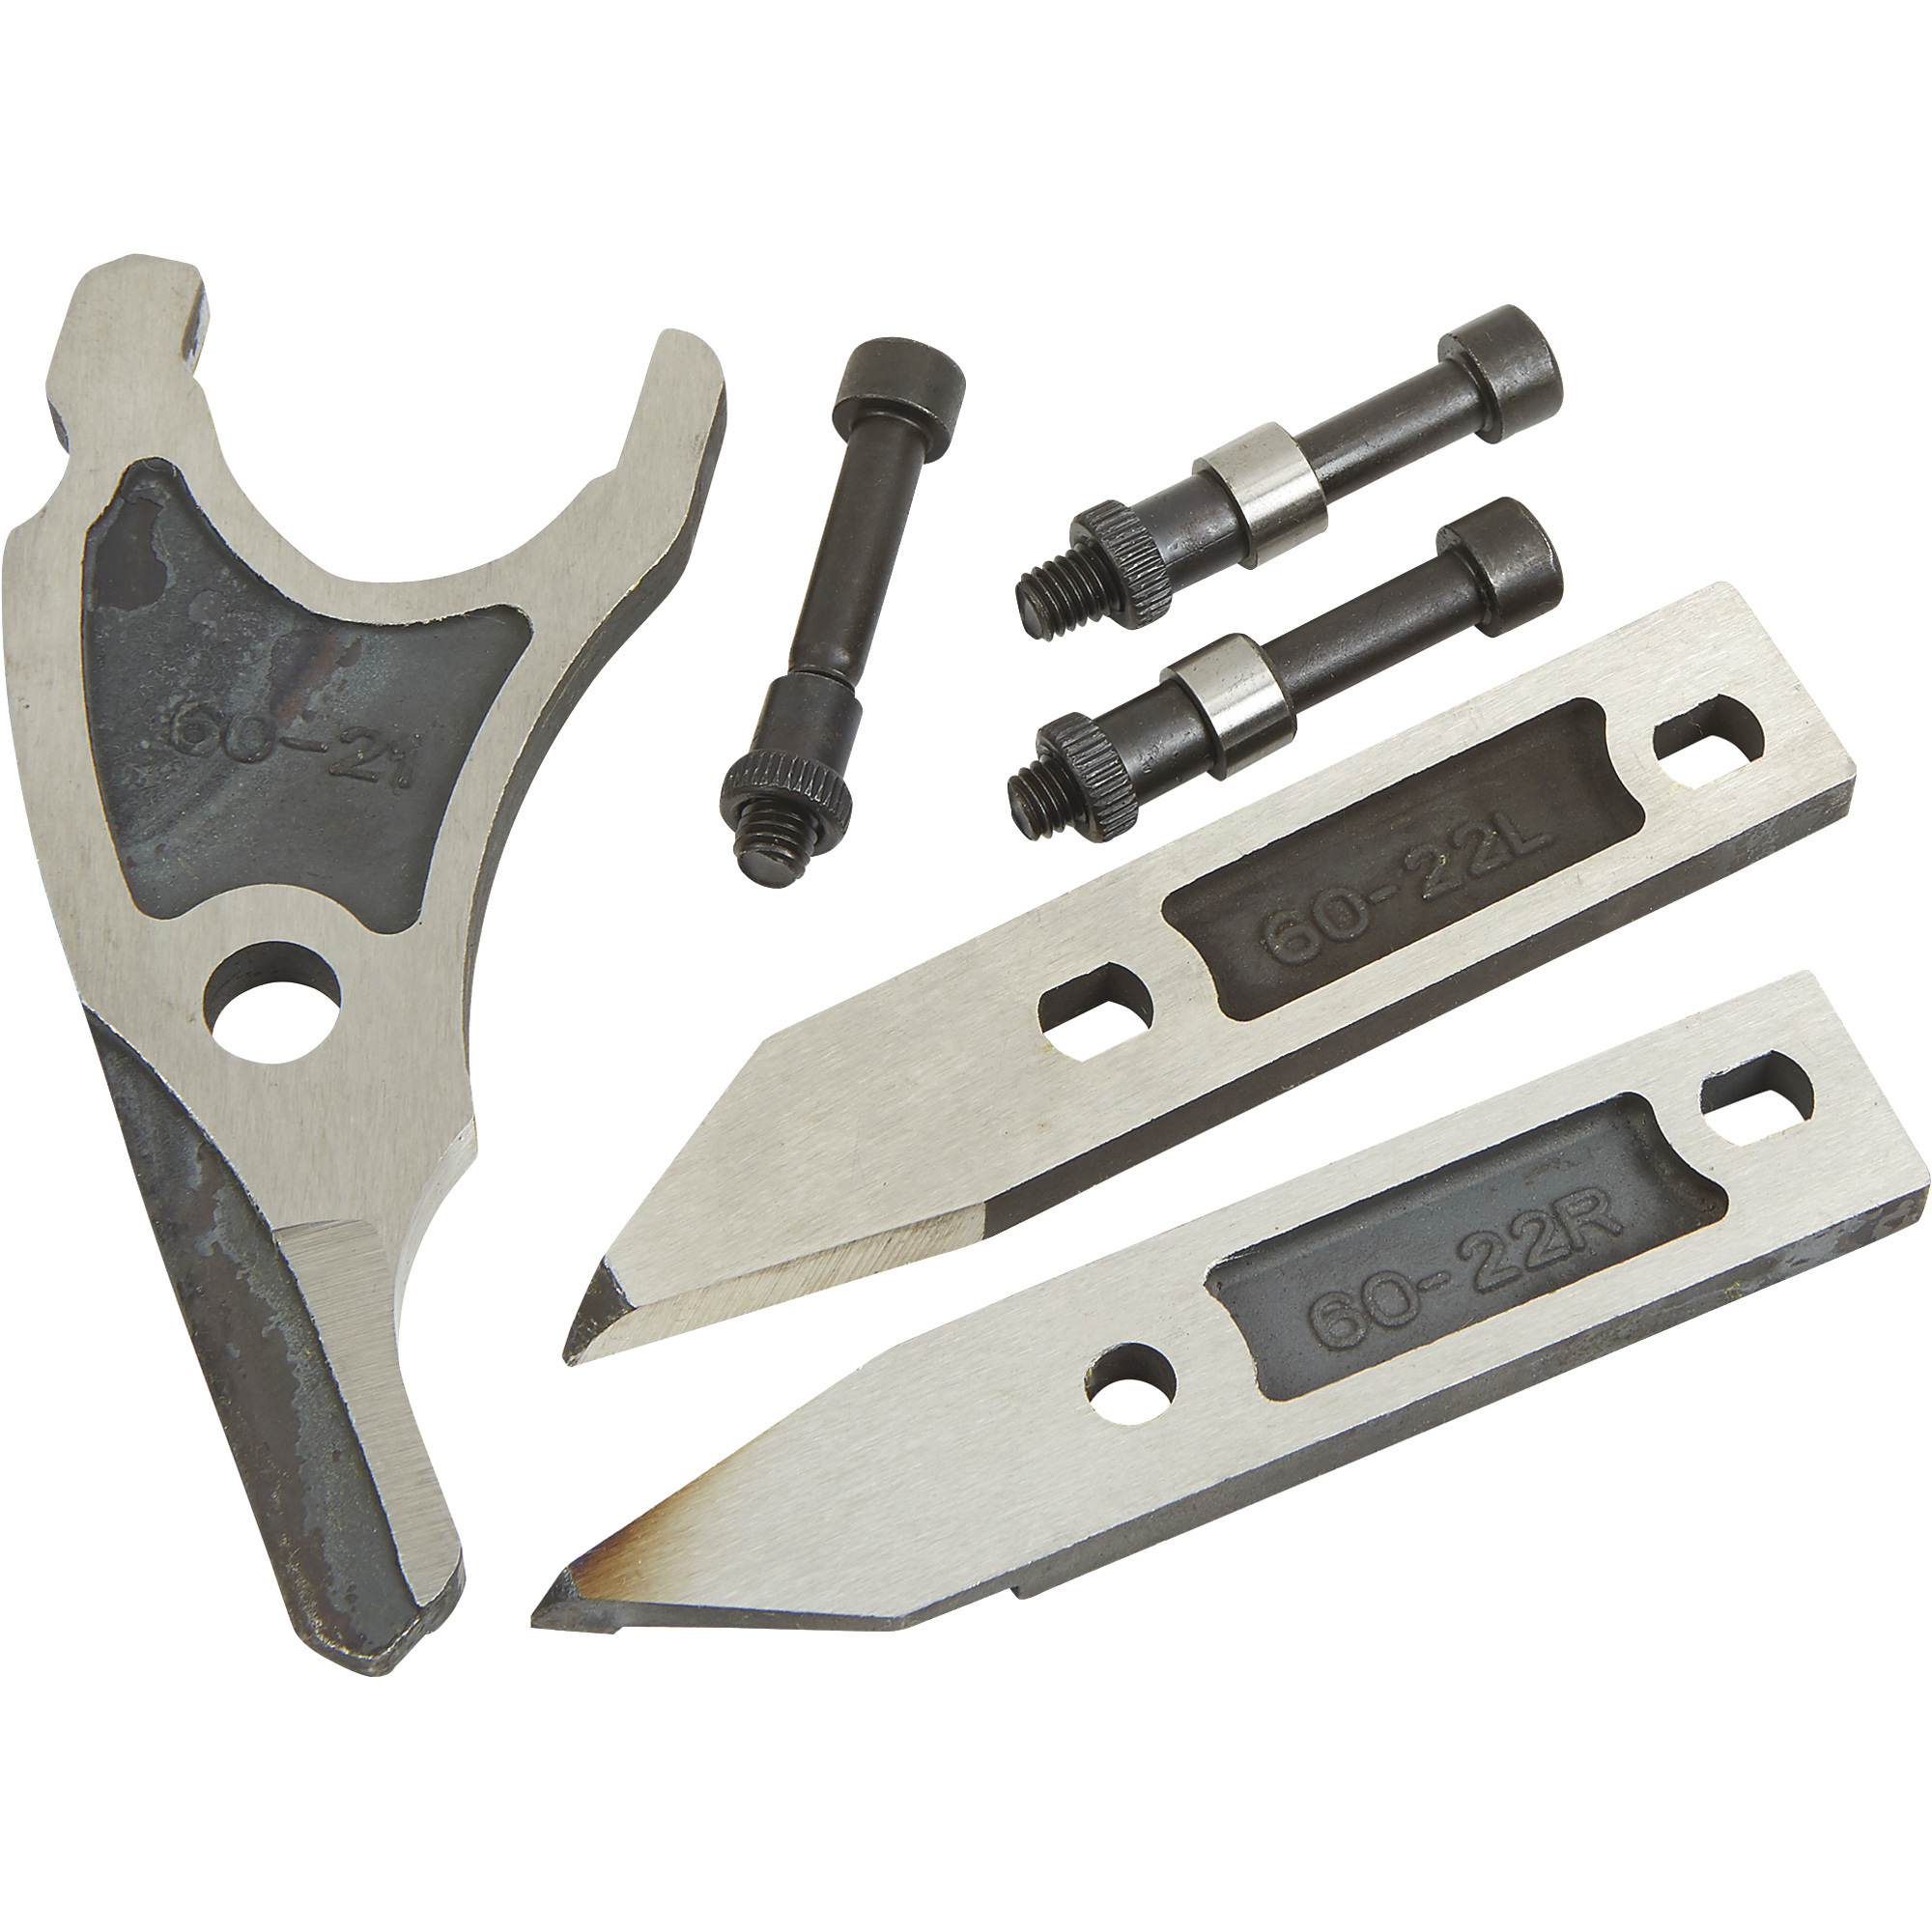 Ironton Electric Cutting Shear Replacement Blades